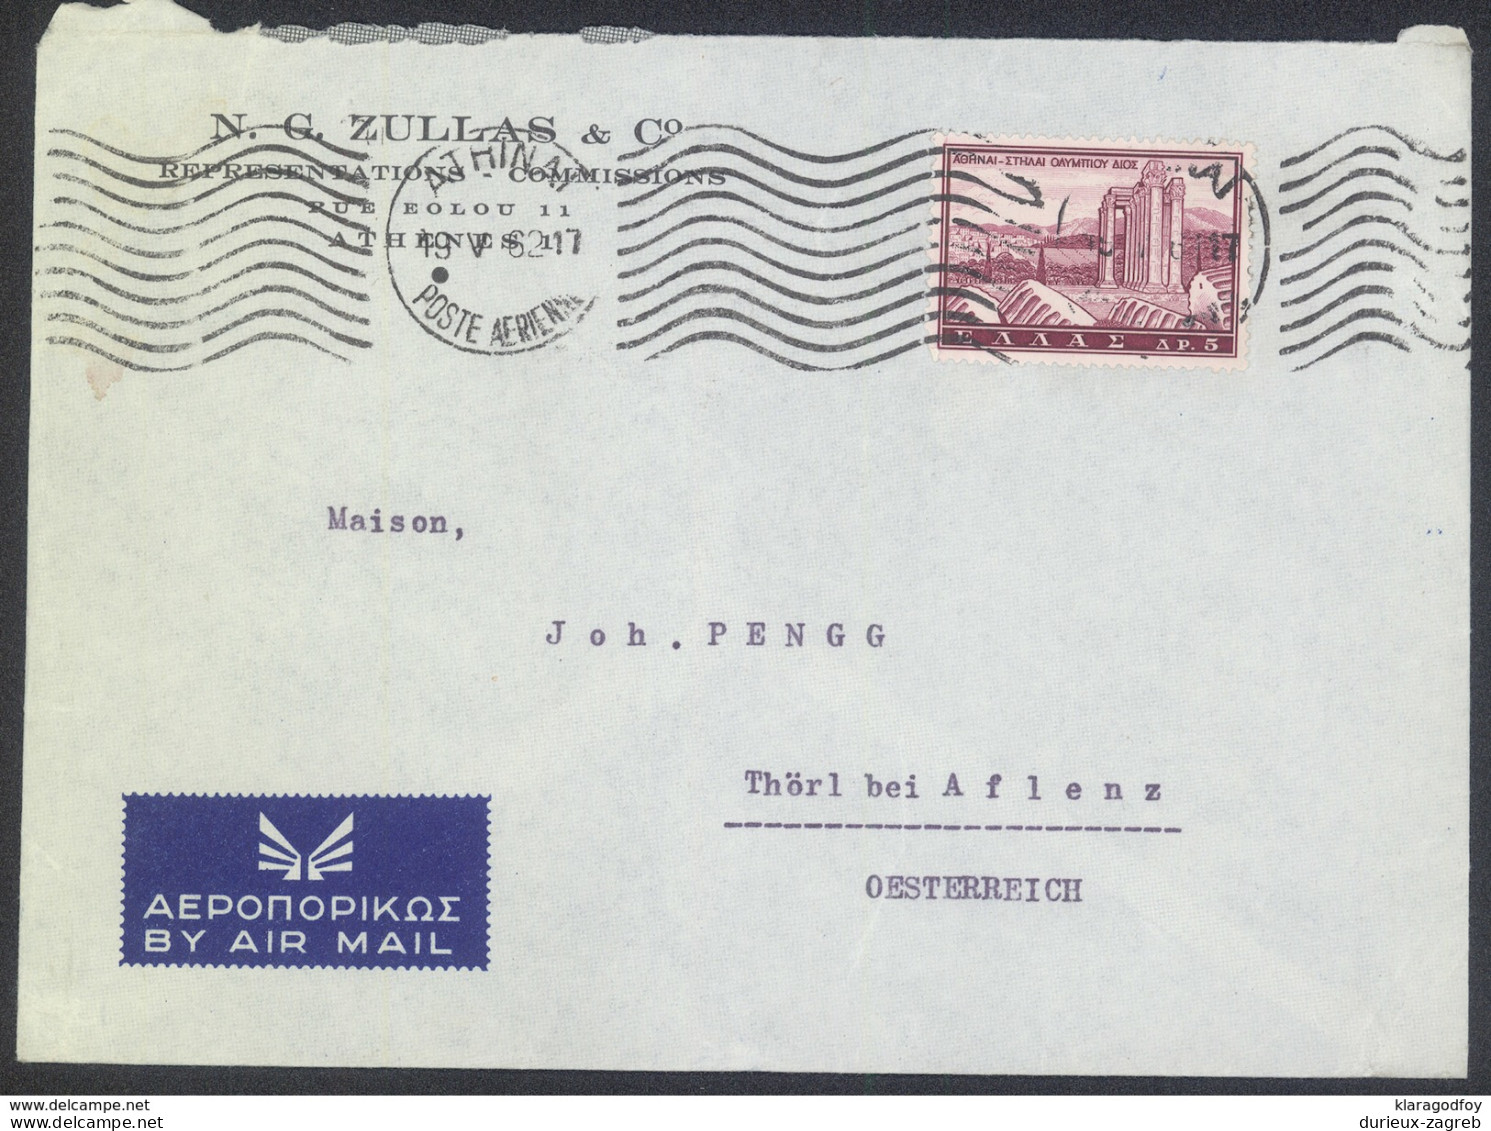 Greece, N. G. Zulas & Co Company Airmail Letter Cover Travelled 1962 Athina Pmk B170410 - Lettres & Documents